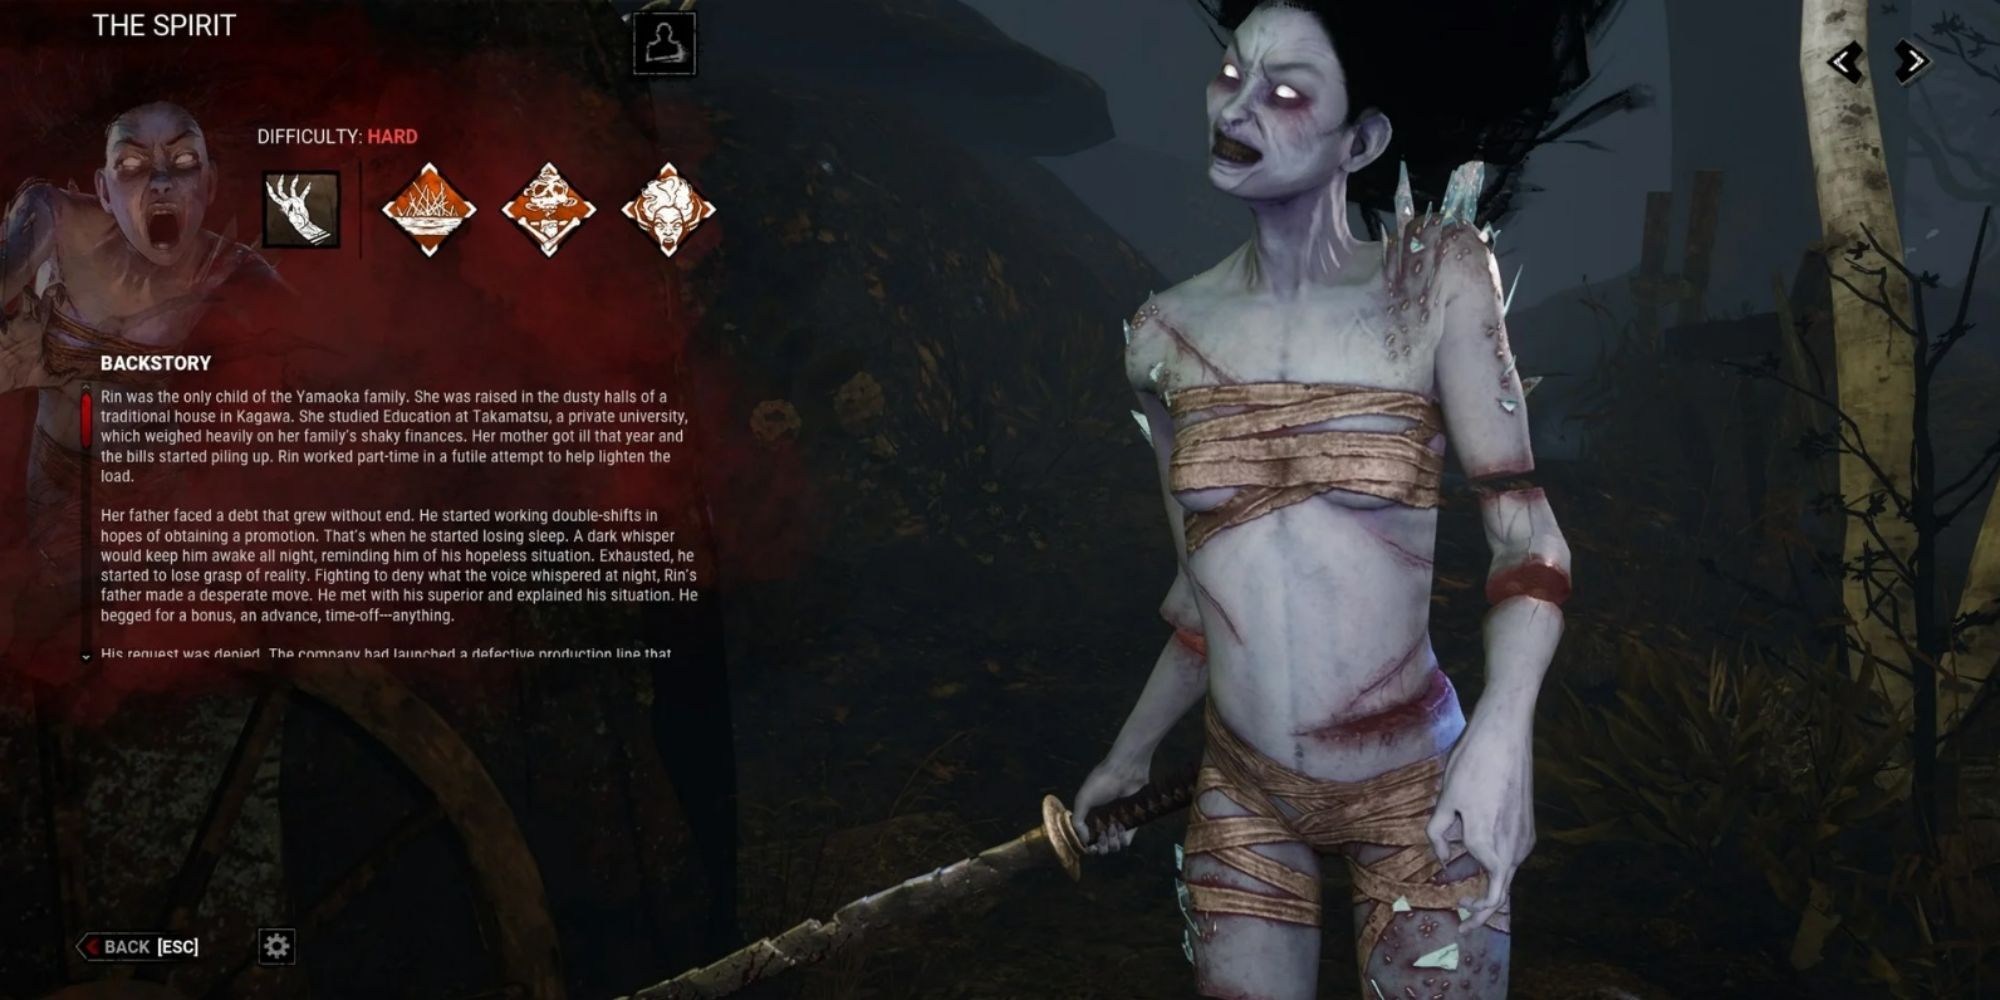 The Spirit and her perks from Dead by Daylight